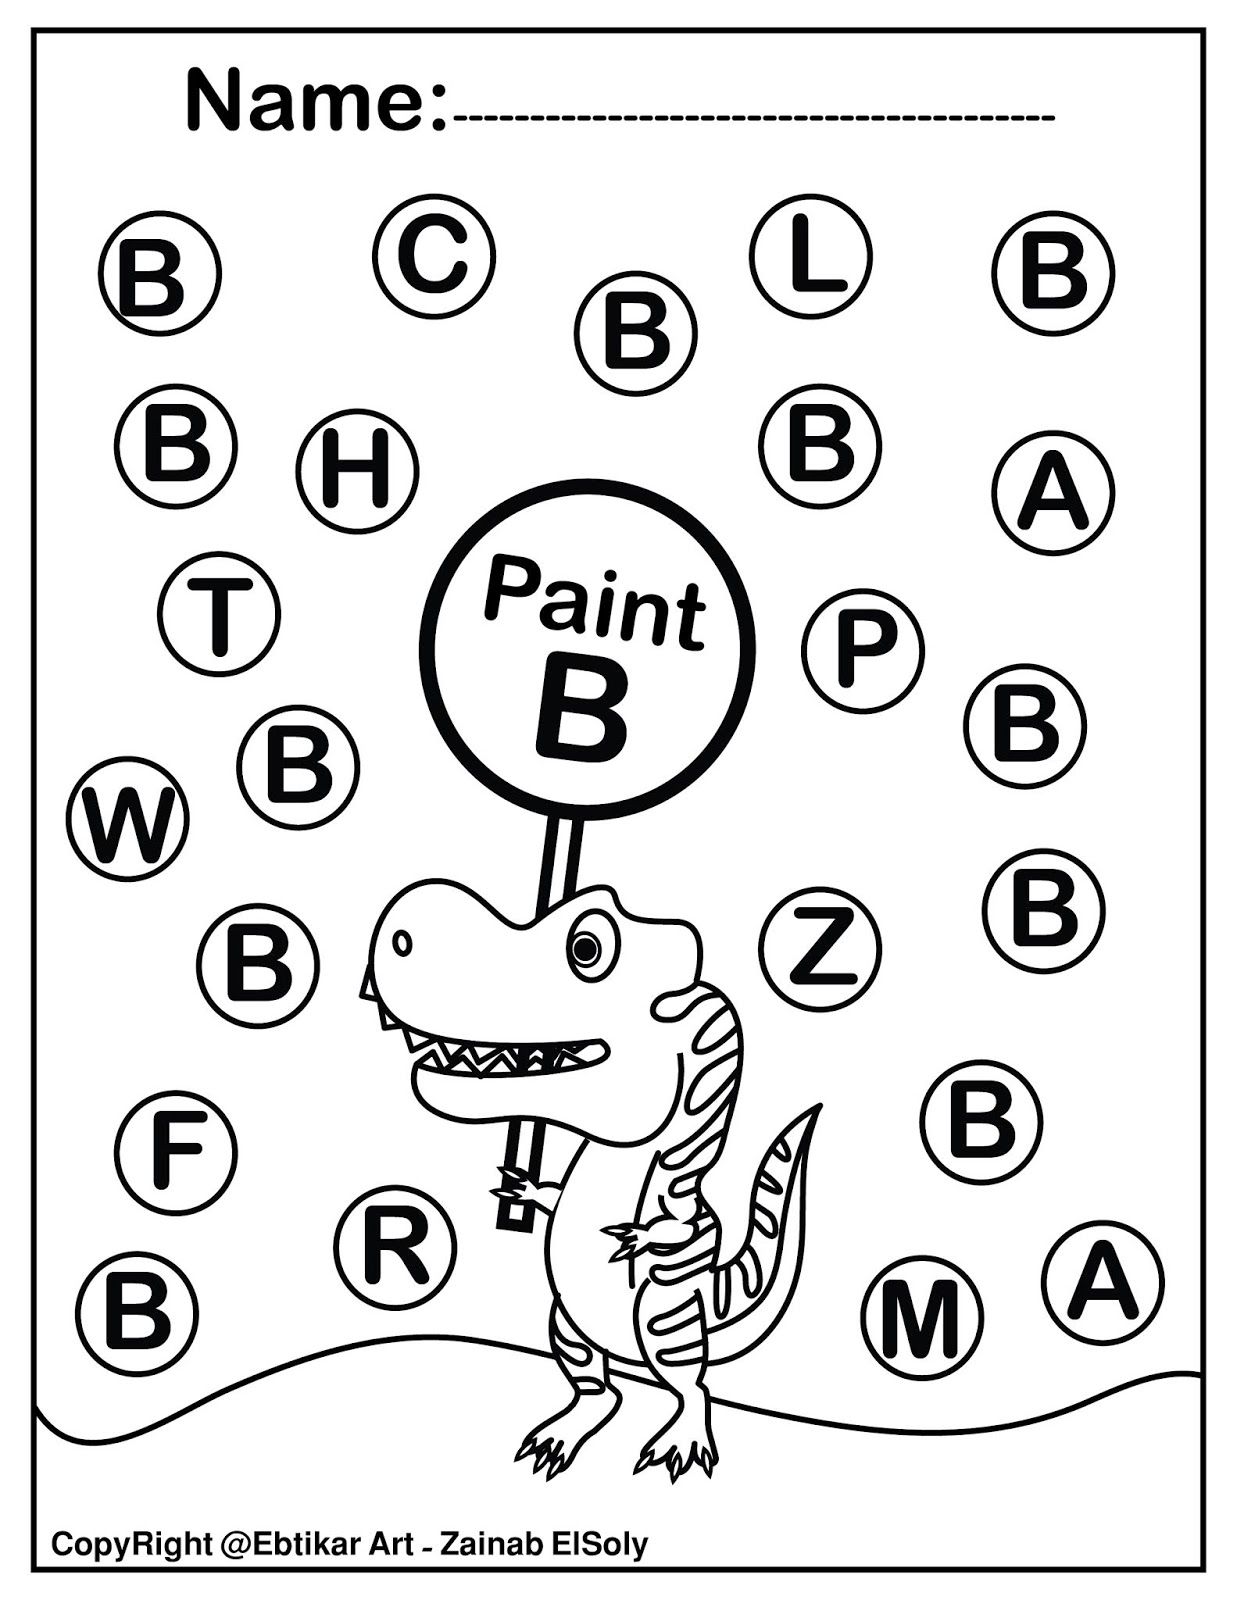 Worksheets : Dinosaur Coloring Sheet Dots Dot Drawing Worksheets Tracing  Numbers With Full Set Of Trex Activity Paint Preschool Private Chemistry  Tutor Learn Everything About Math Subtraction. Tracing Numbers With Dots.  Math